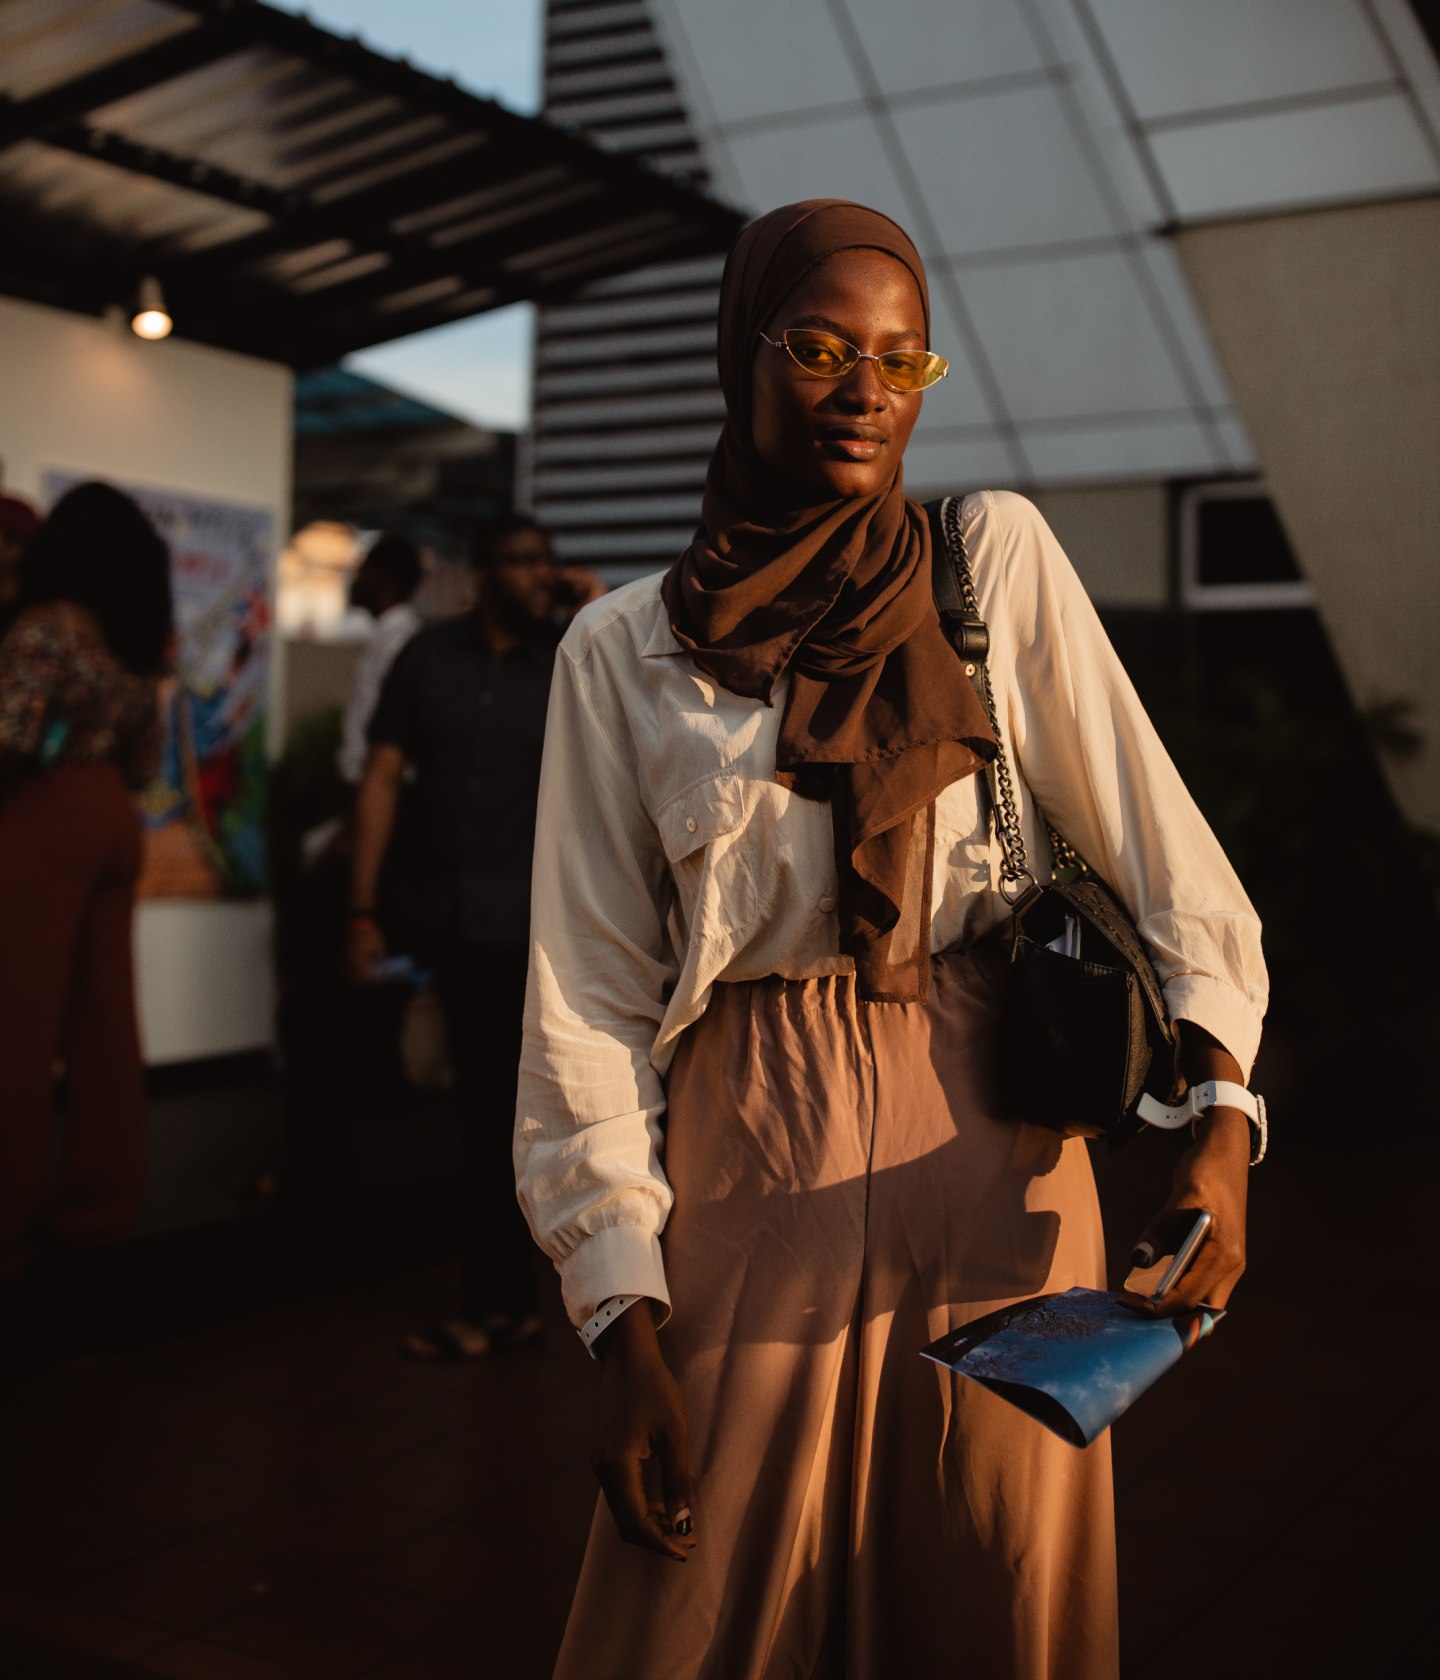 At ART X Lagos, dusk gave simple solids and bold patterns a whole new life